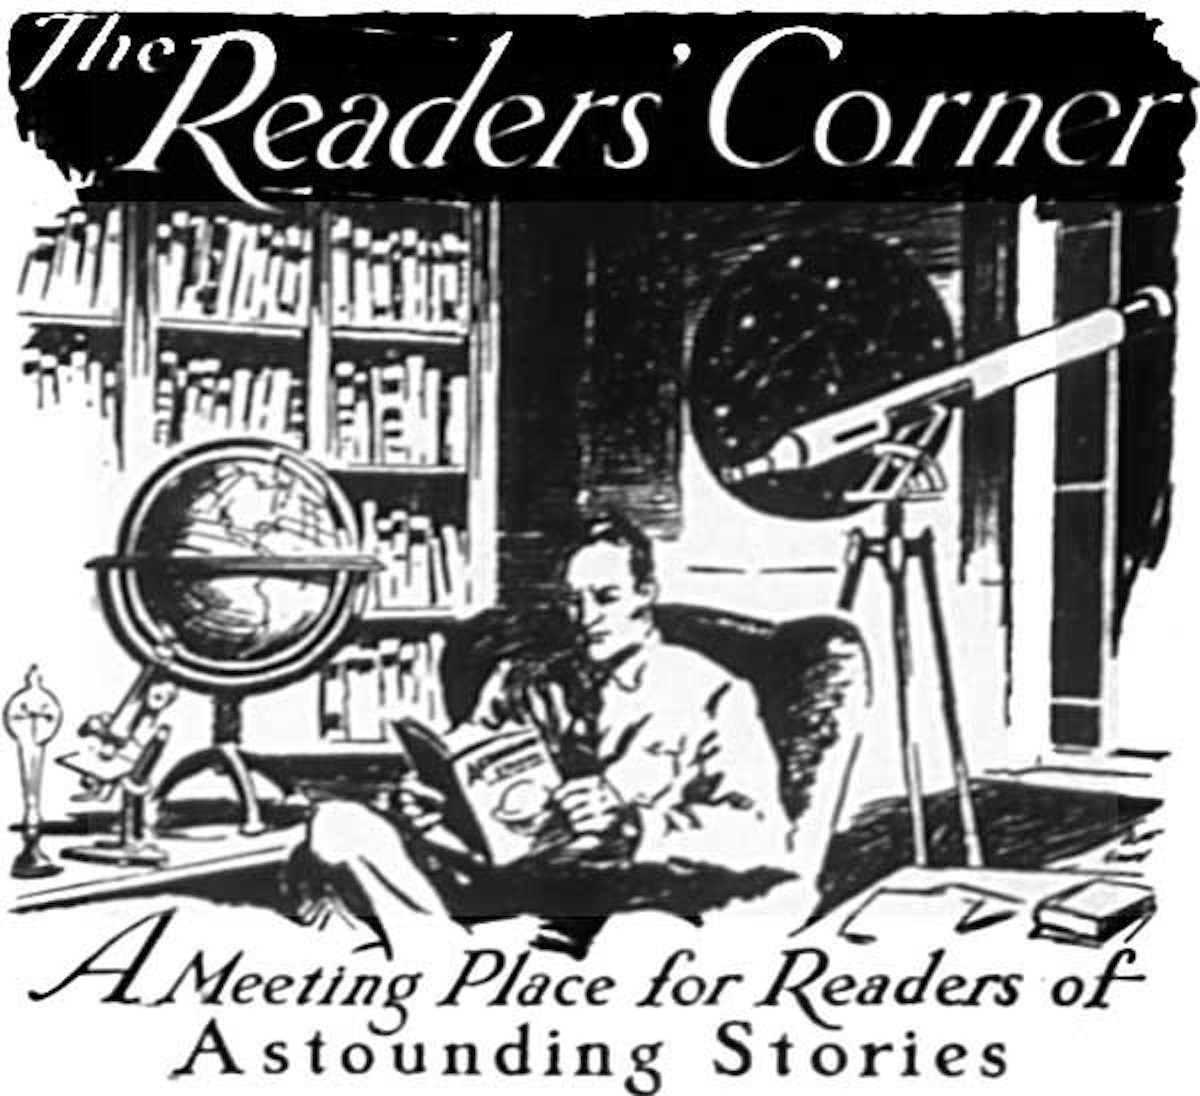 featured image - Astounding Stories of Super-Science August 1931: VOL. VII, NO. 2 - The Readers' Corner